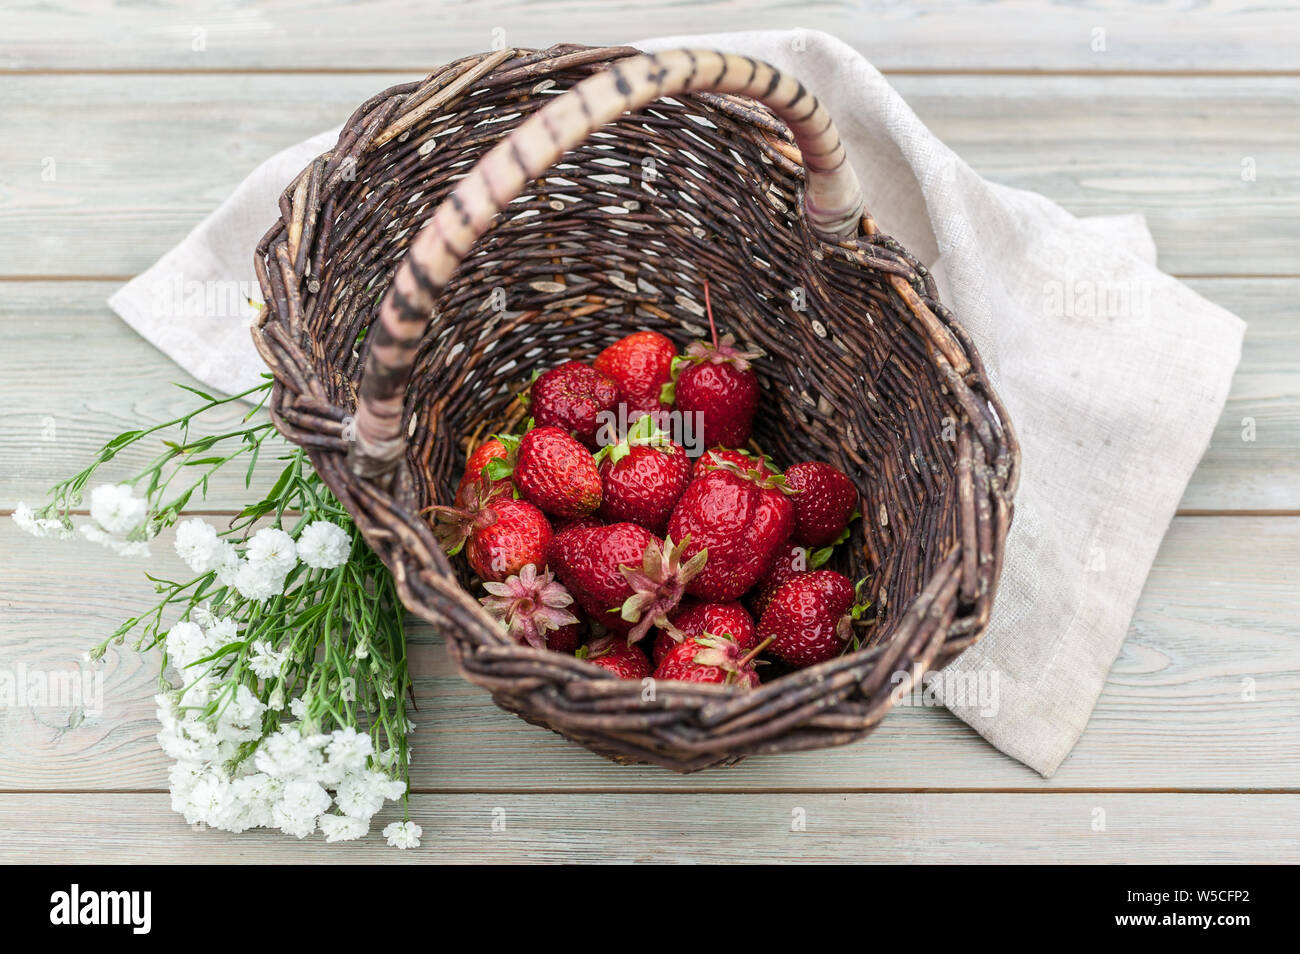 Ripe strawberries in a basket. Summer food composition on a wooden table. Stock Photo